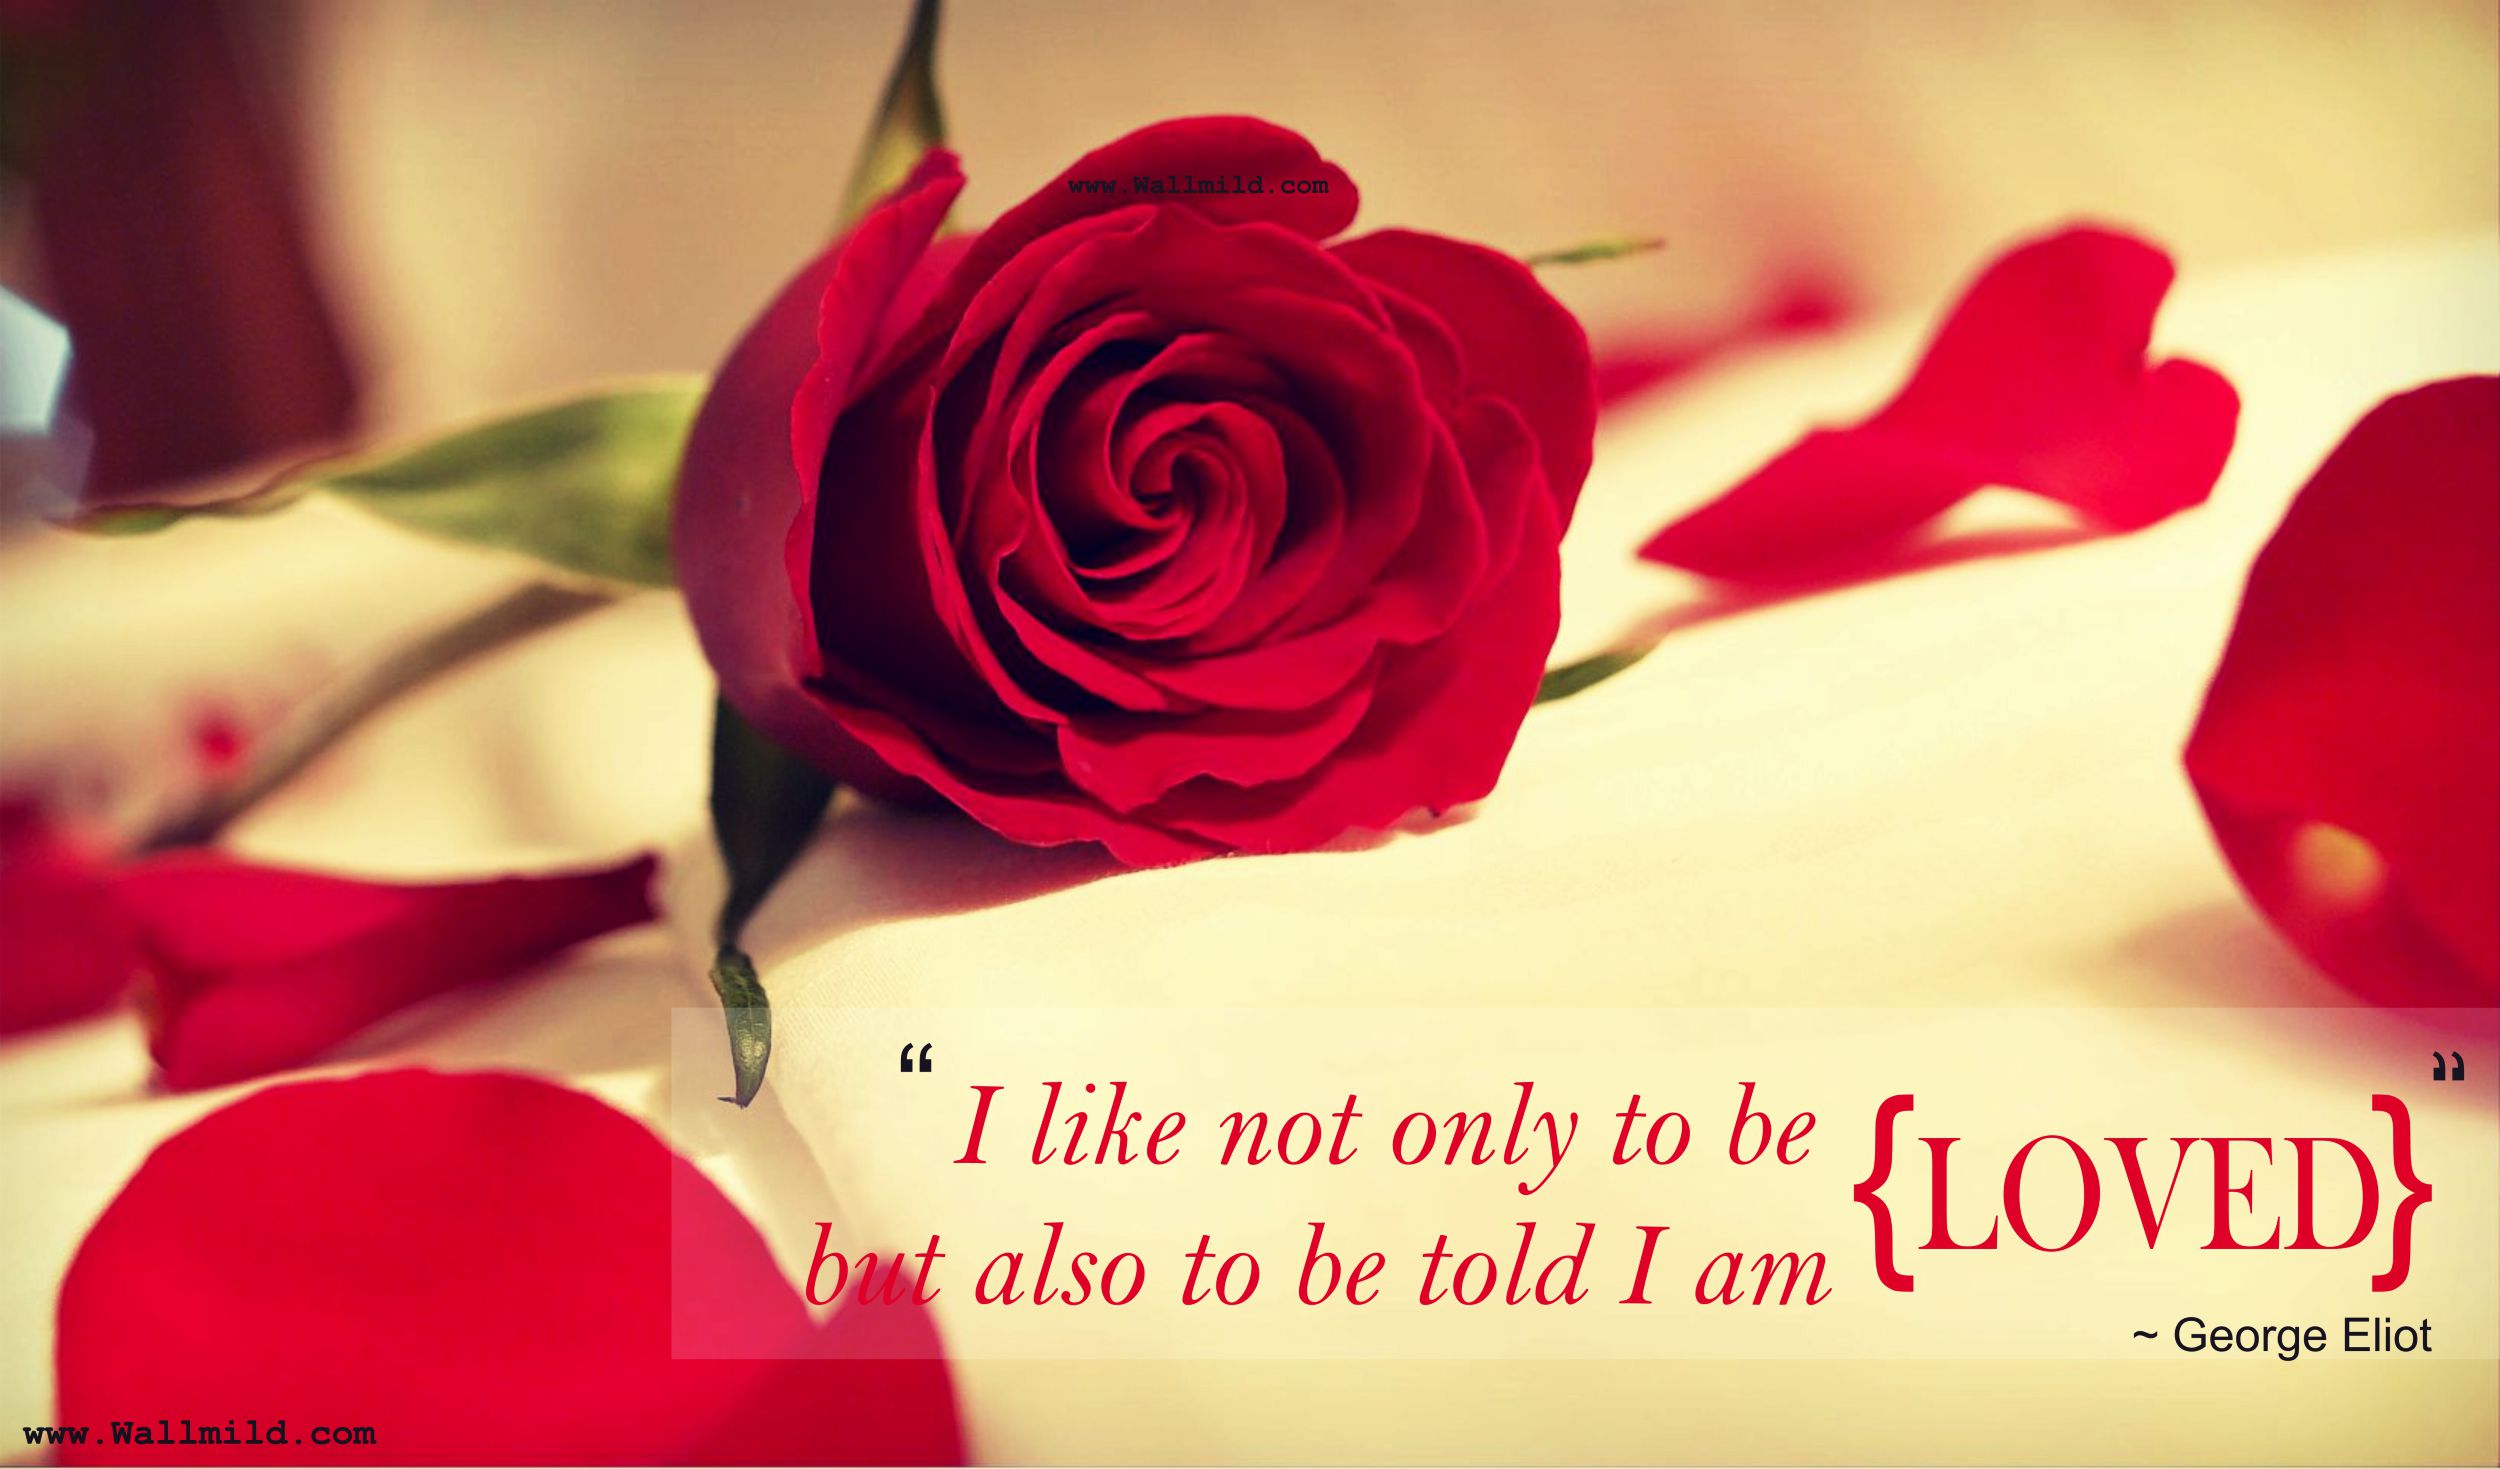 Cute Love Quotes HD Wallpaper 842 Best Wallpapers Cute Love Quotes HD